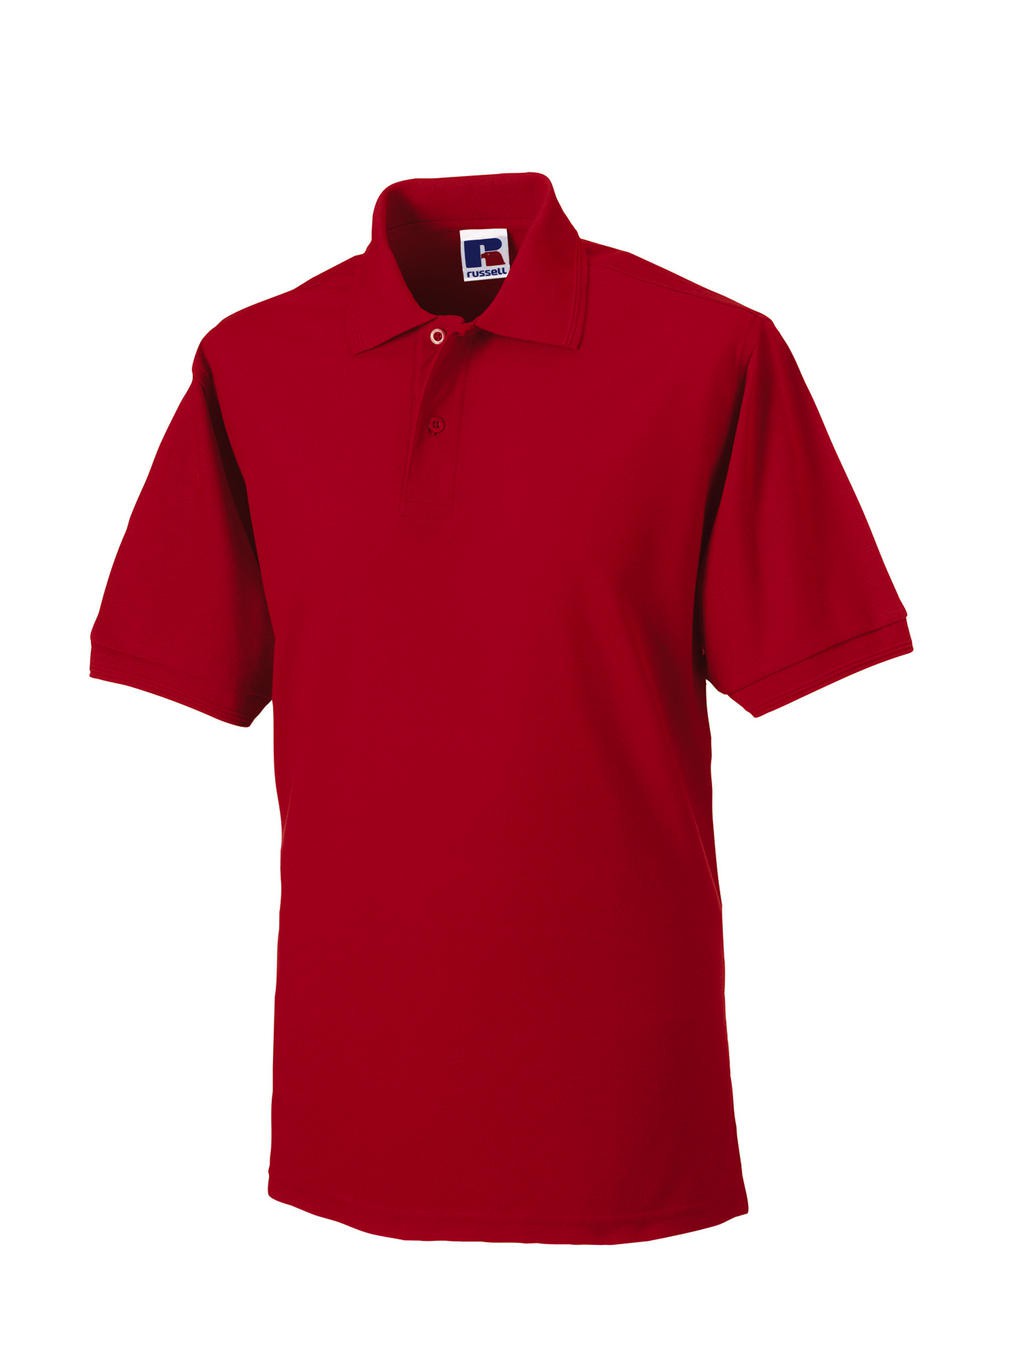 Russell Europe 3er Pack Hardwearing Polo - up to 4XL 0R599M0